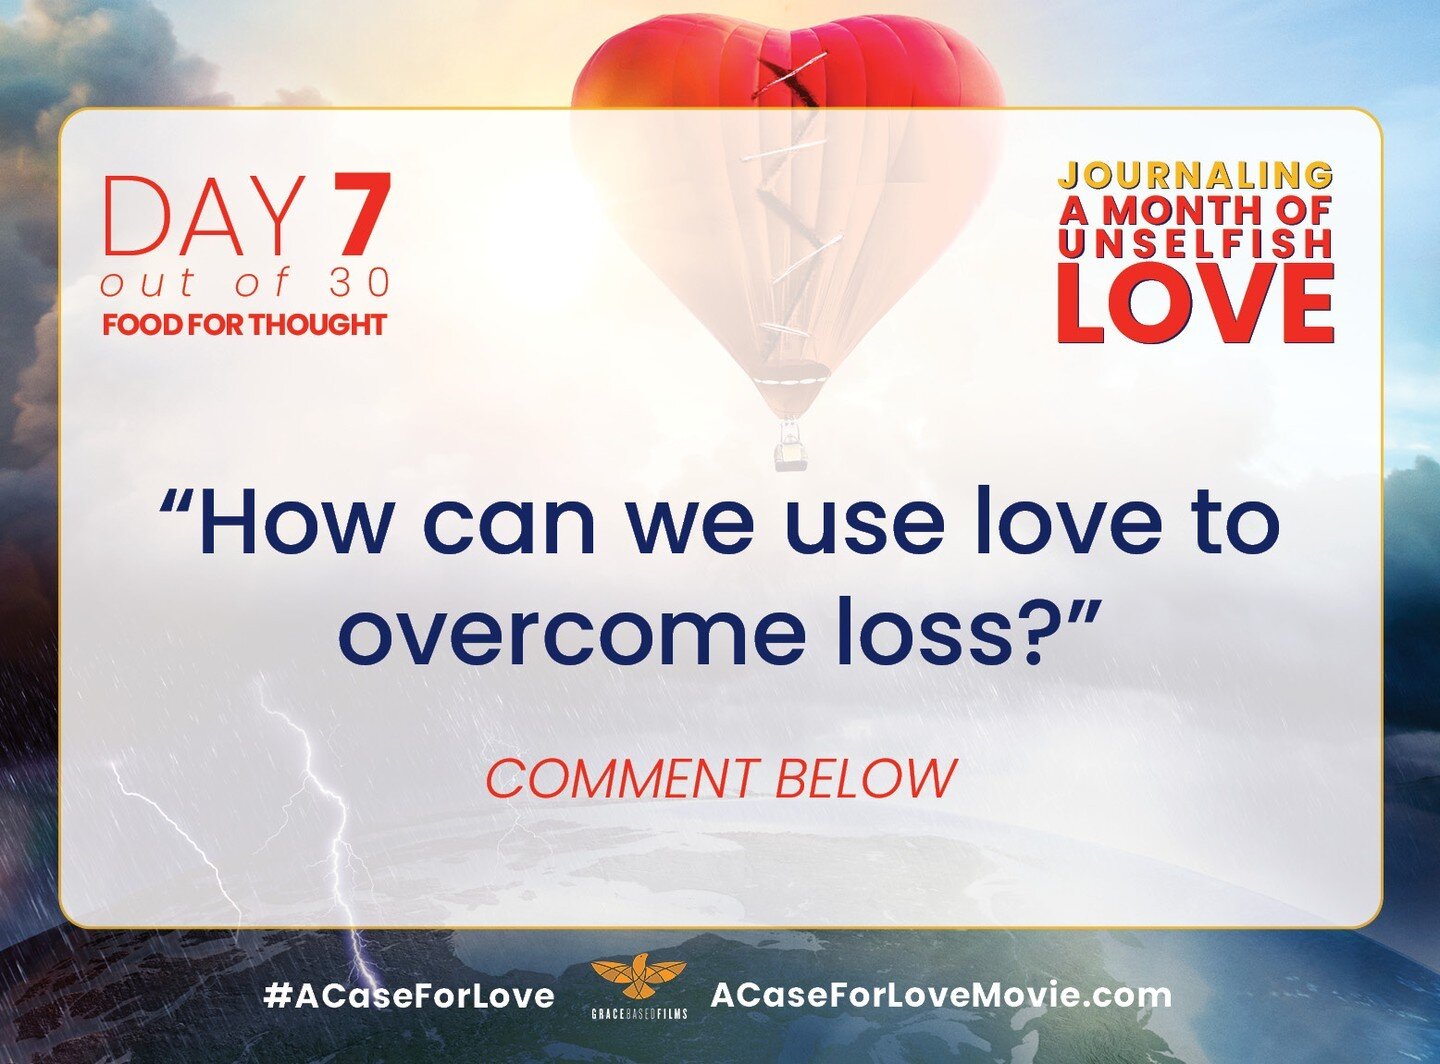 DAY 7 of 30--tell us what you think! How's the journaling going? See today's prompt to get those comment juices flowing and let us know how acts unselfish love are evident in your experience today: whether acts you witness, experience, or perform! Ne